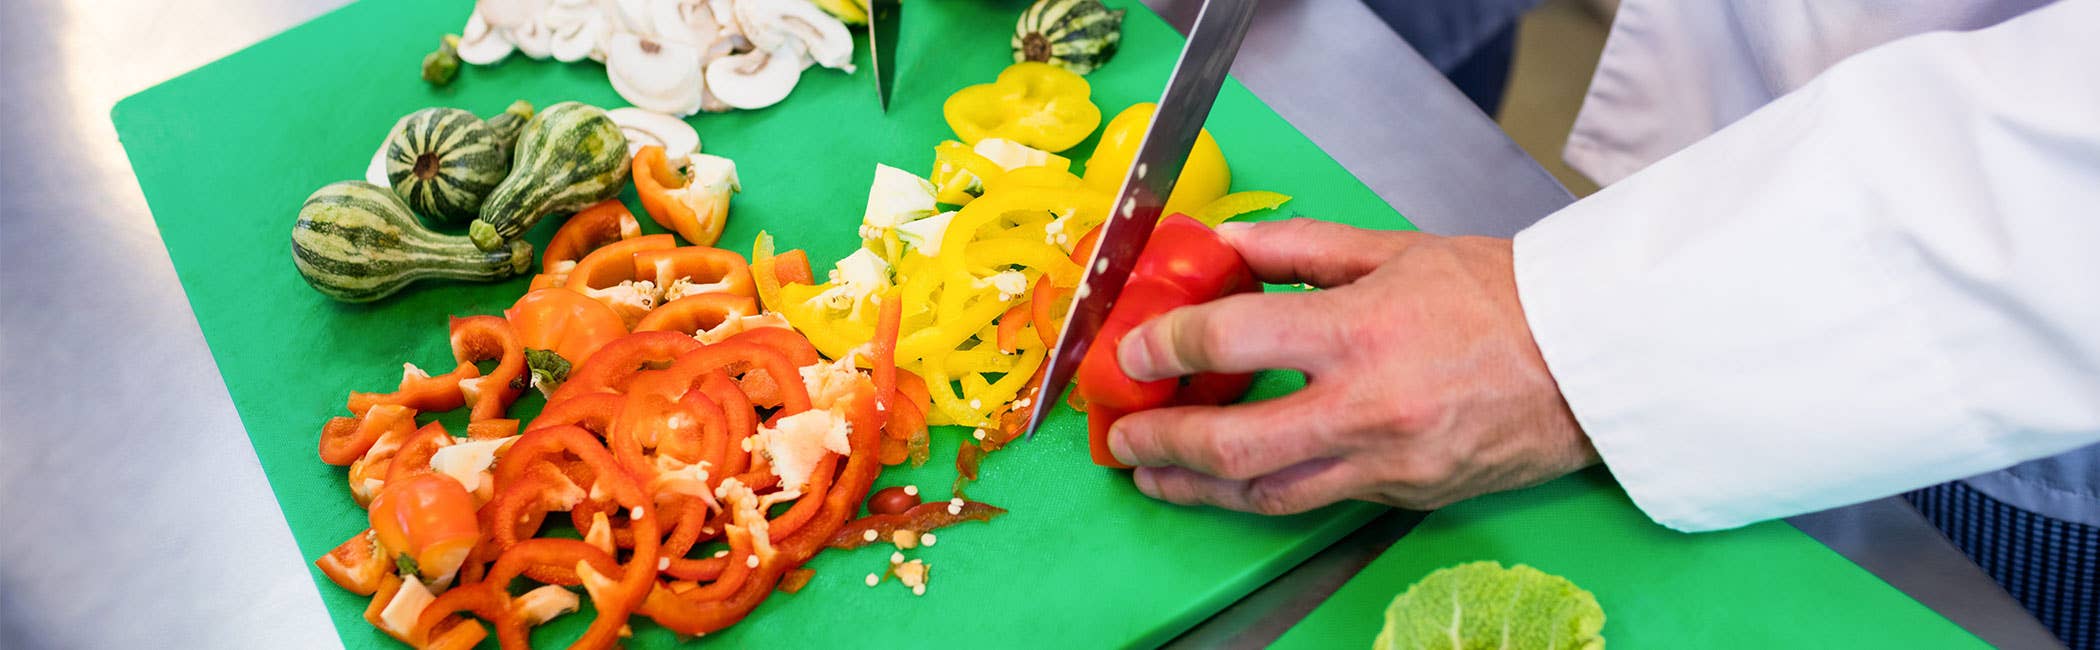 Chopping boards: does the colour really matter?